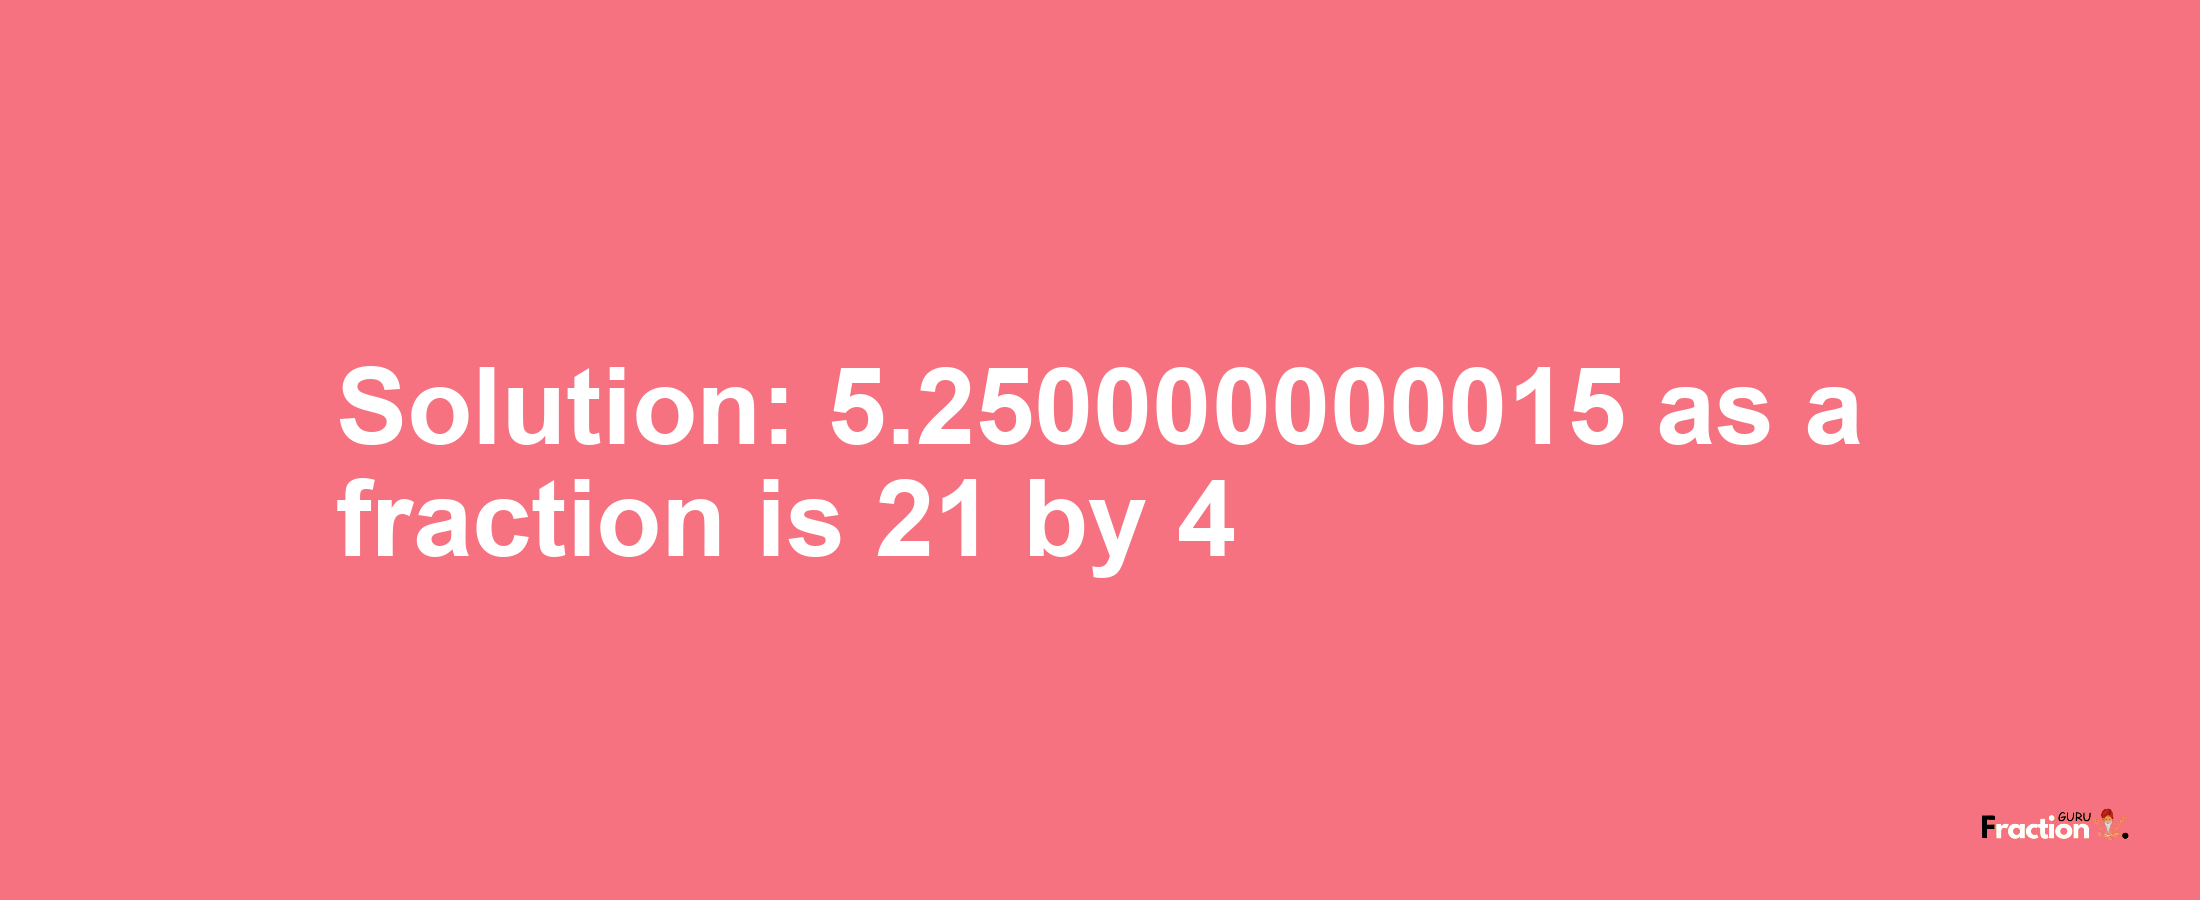 Solution:5.250000000015 as a fraction is 21/4